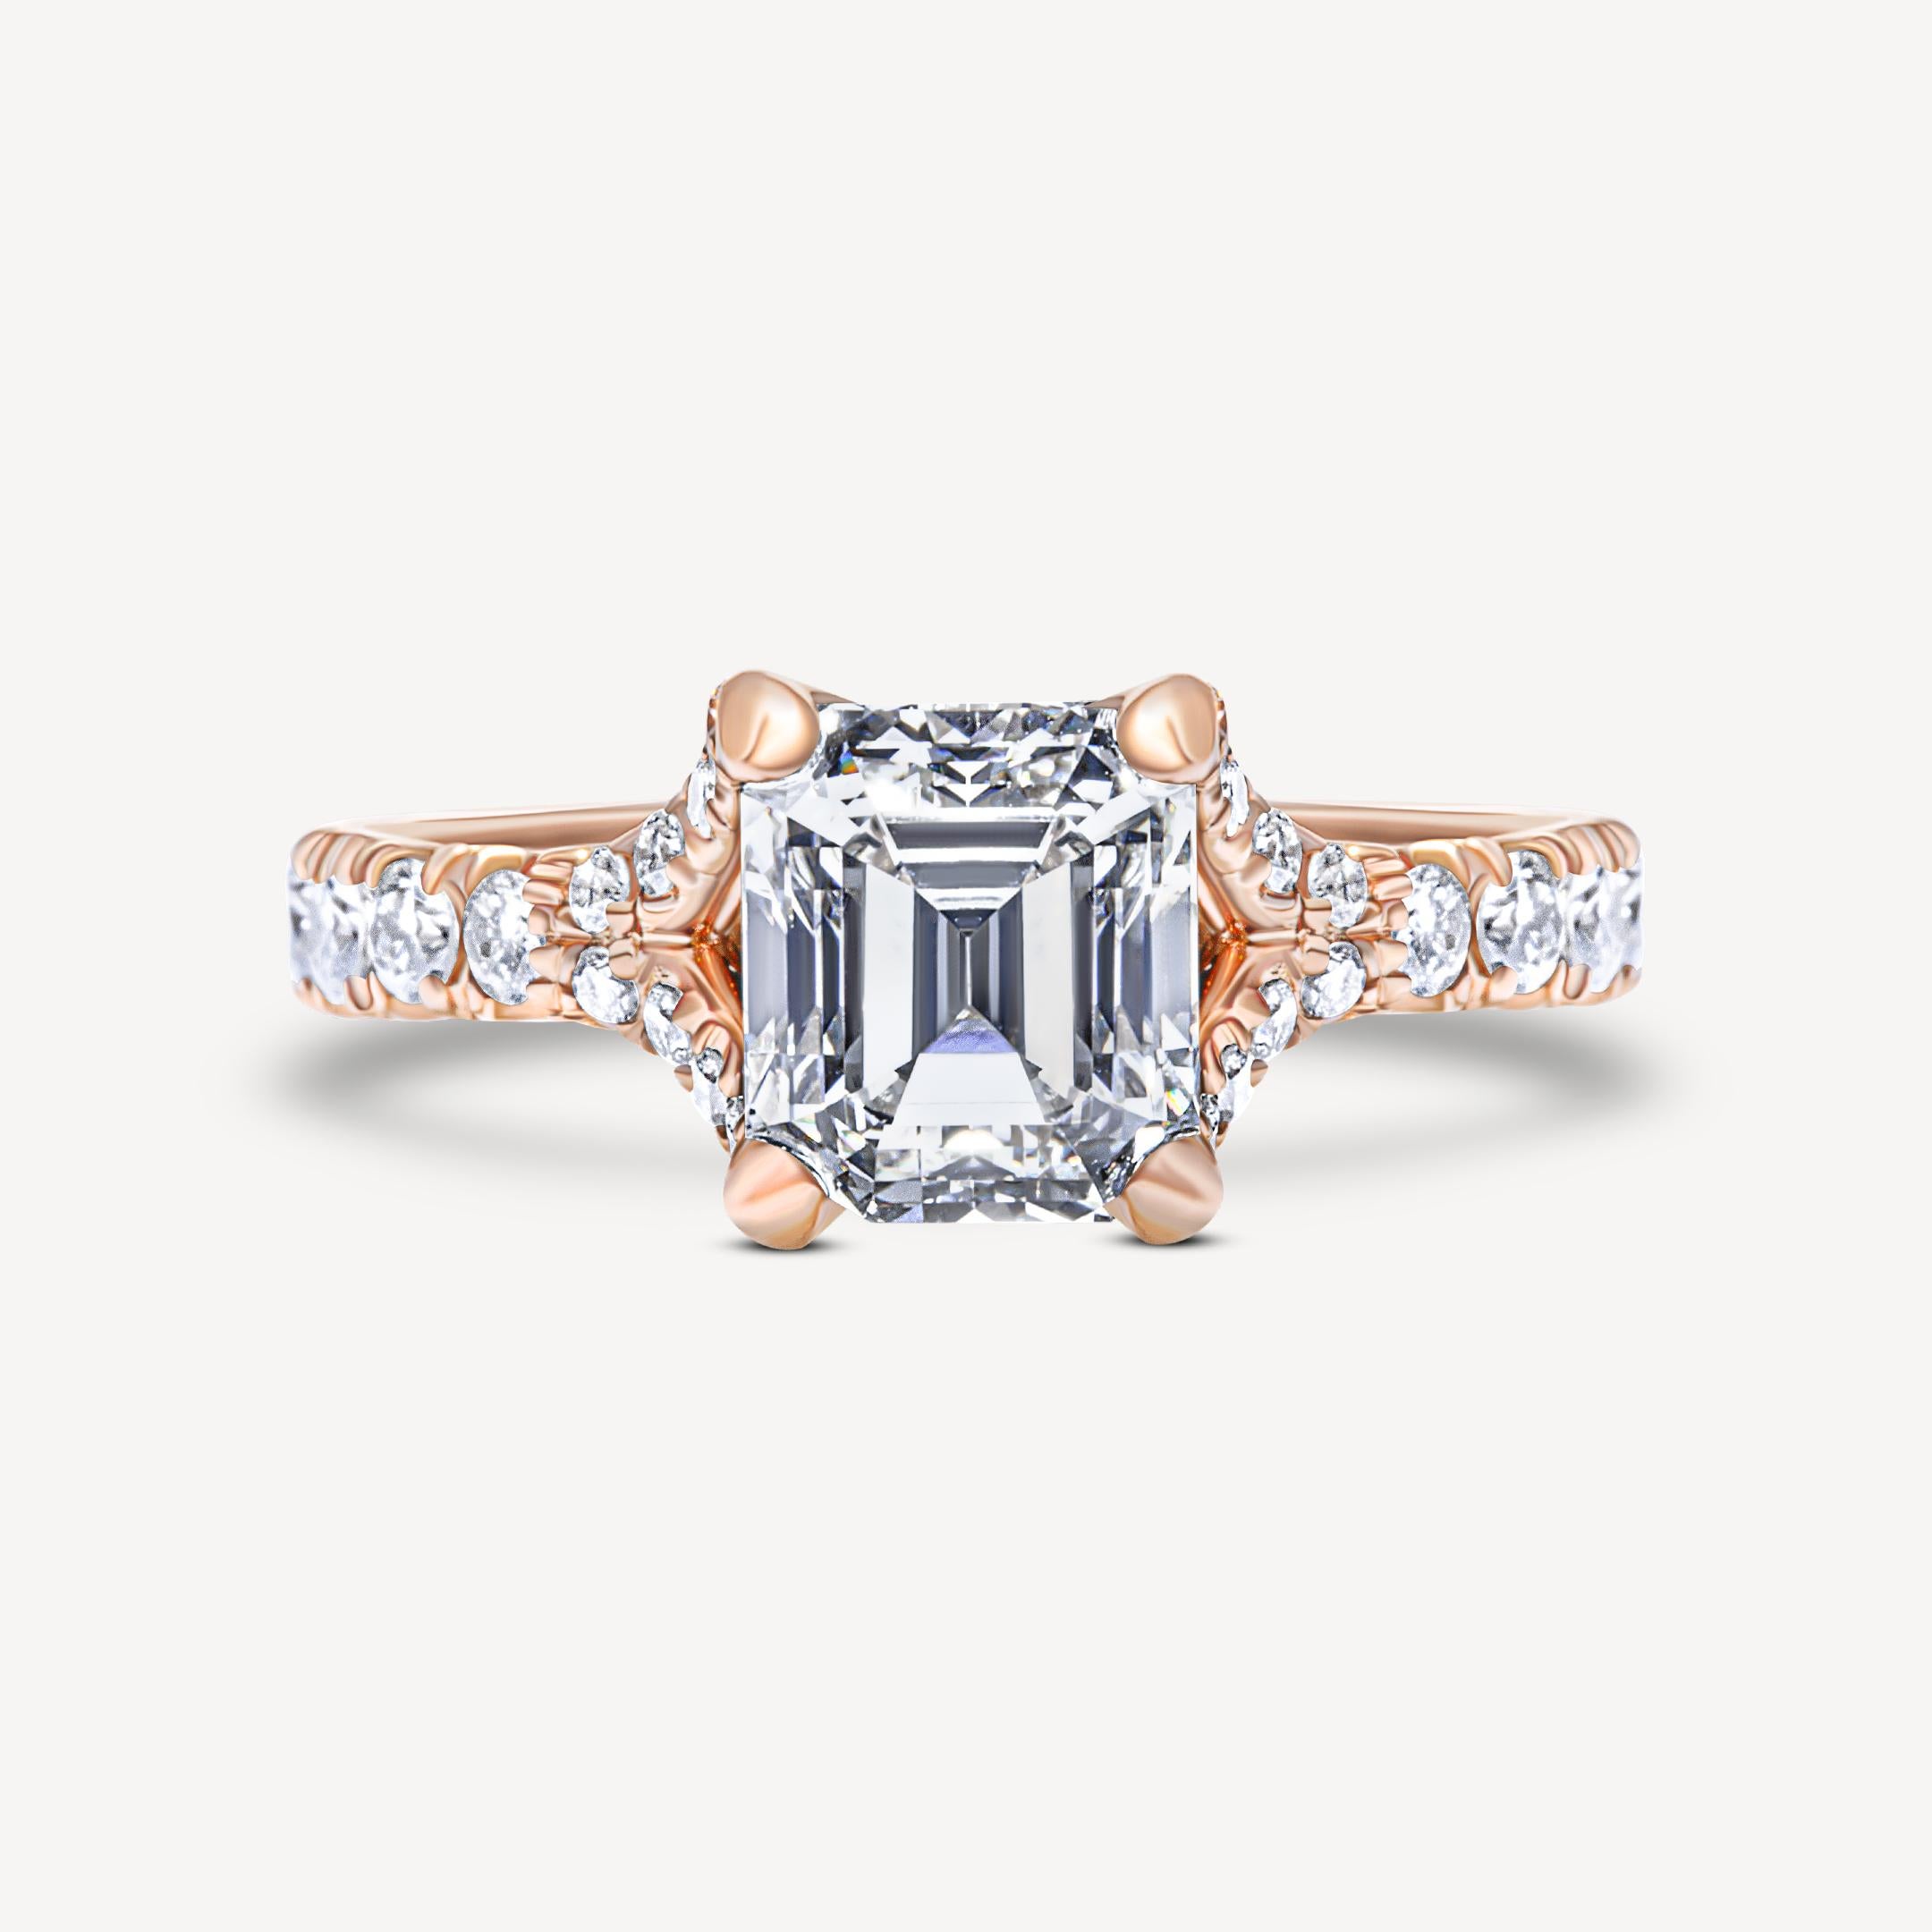 ANNIVERSARY Ring in white gold 18Kt 4.20 gr with central diamond cushion shape J color VS1 clarity 2.34 ct and diamonds G color VS clarity in total 0.50 ct.
This anniversary collection represents a tribute to the exceptional
craftsmanship, enduring